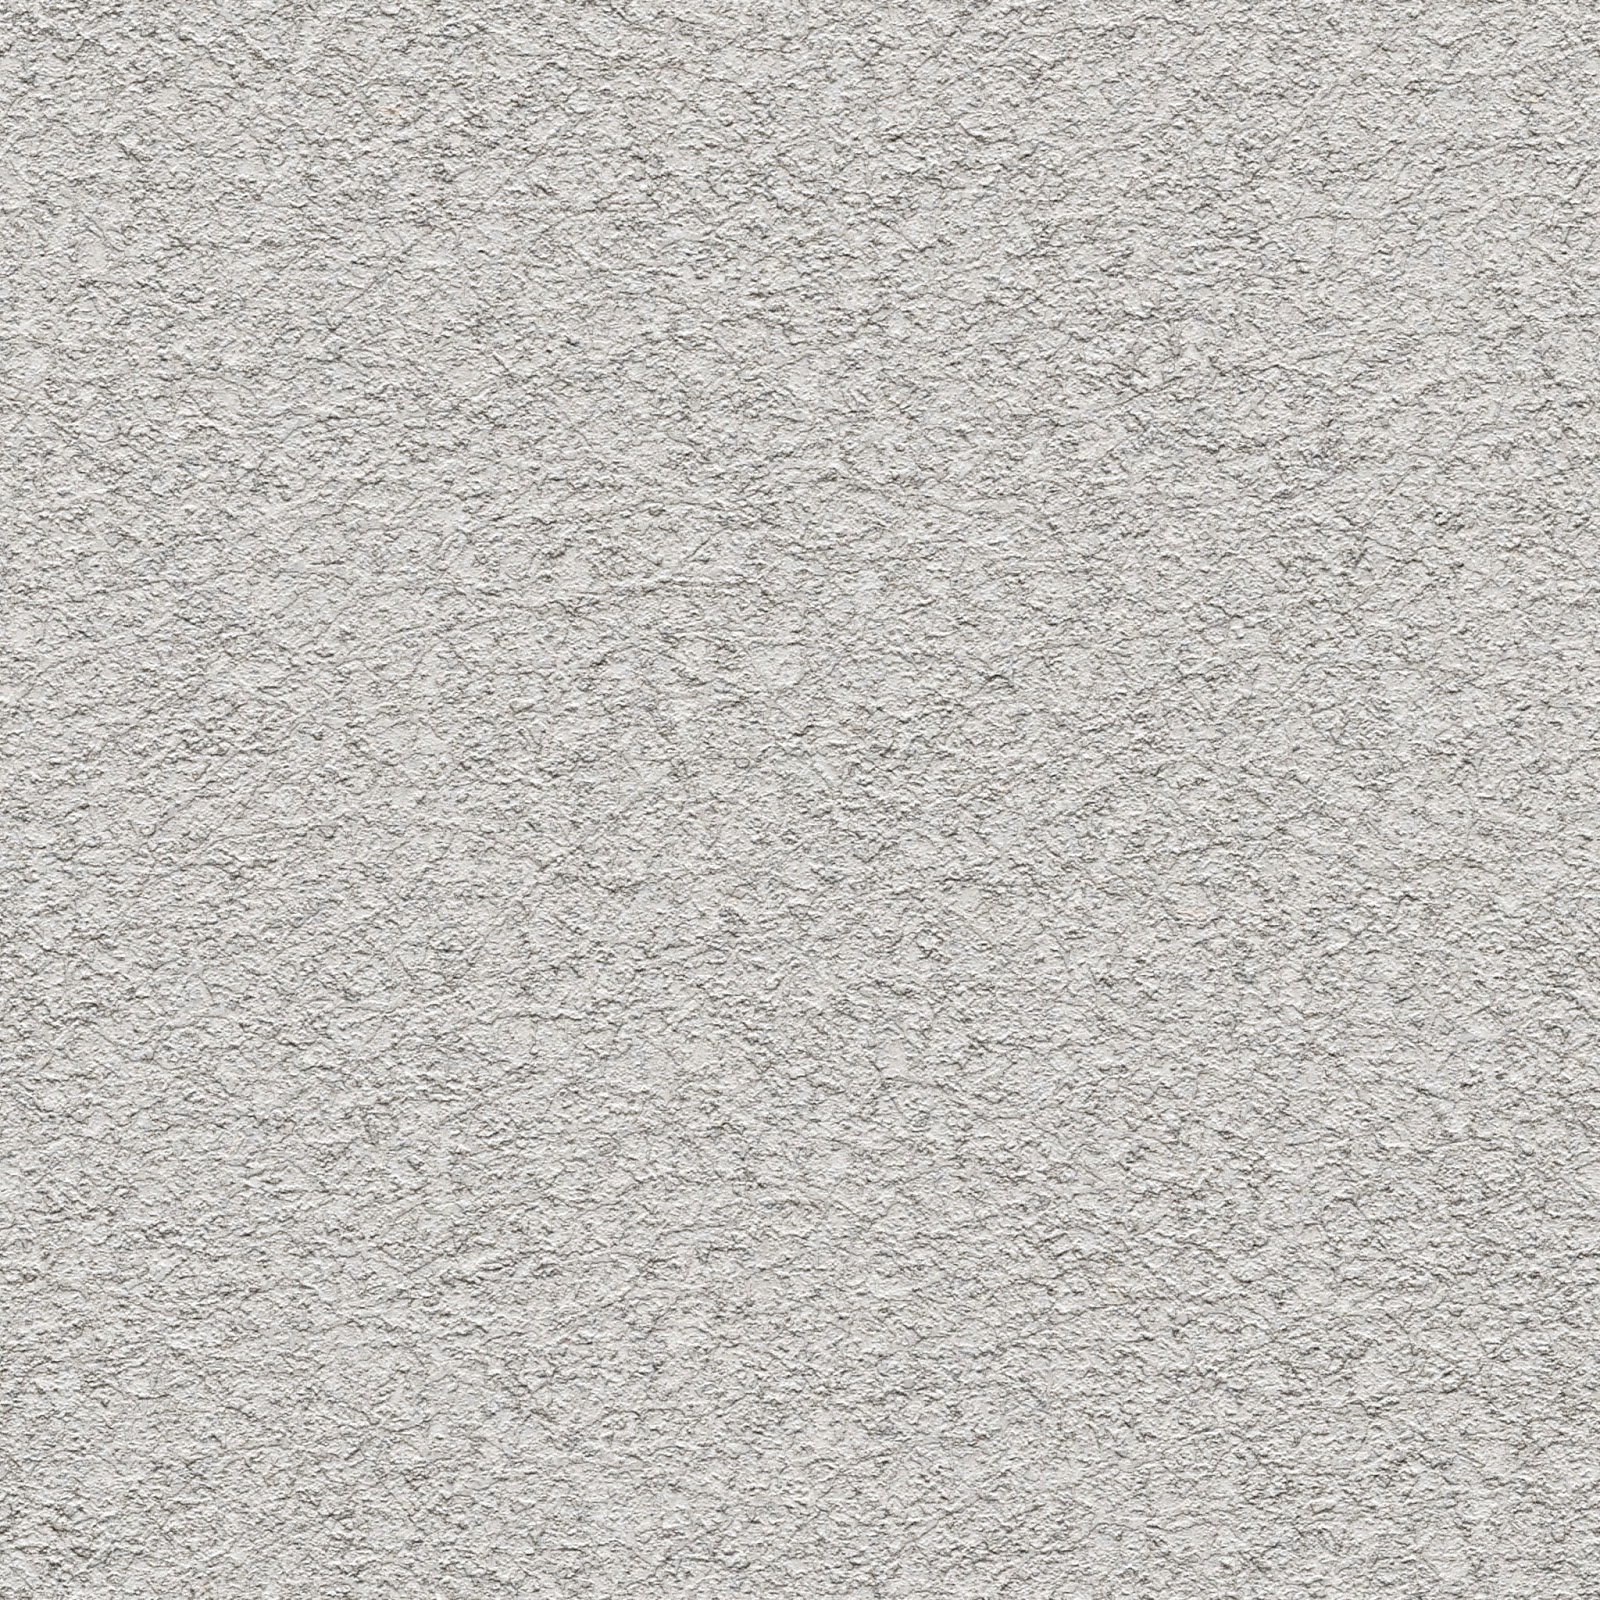 Rough stucco white dirty paint streaky plaster fine detail wall april 2014 texture seamless tileable